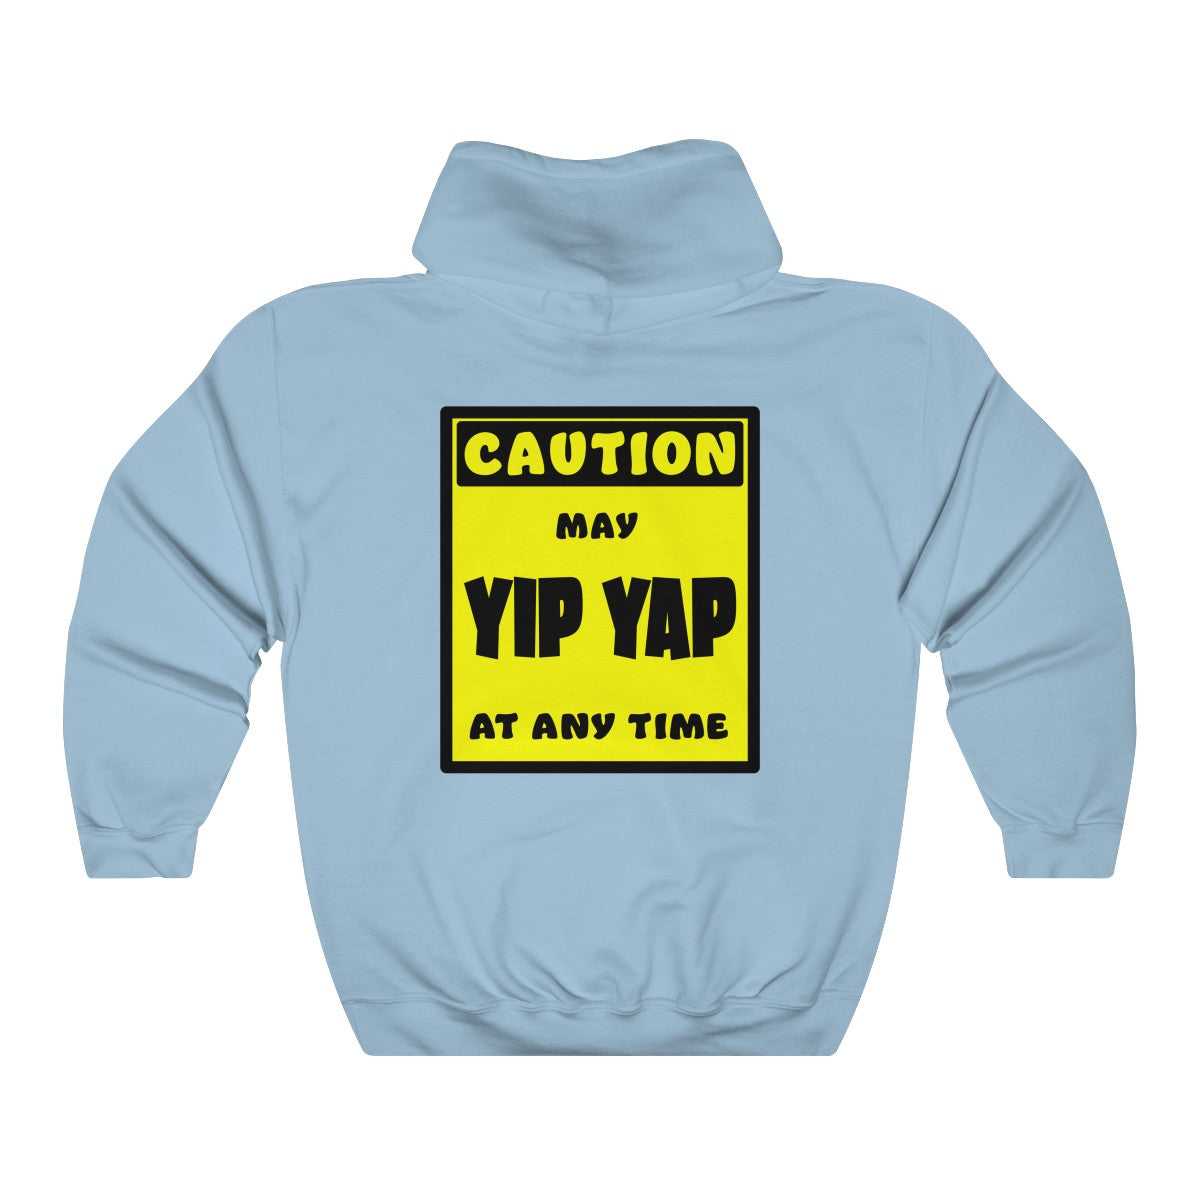 CAUTION! May Yip Yap at any time! - Hoodie Hoodie AFLT-Whootorca Light Blue S 